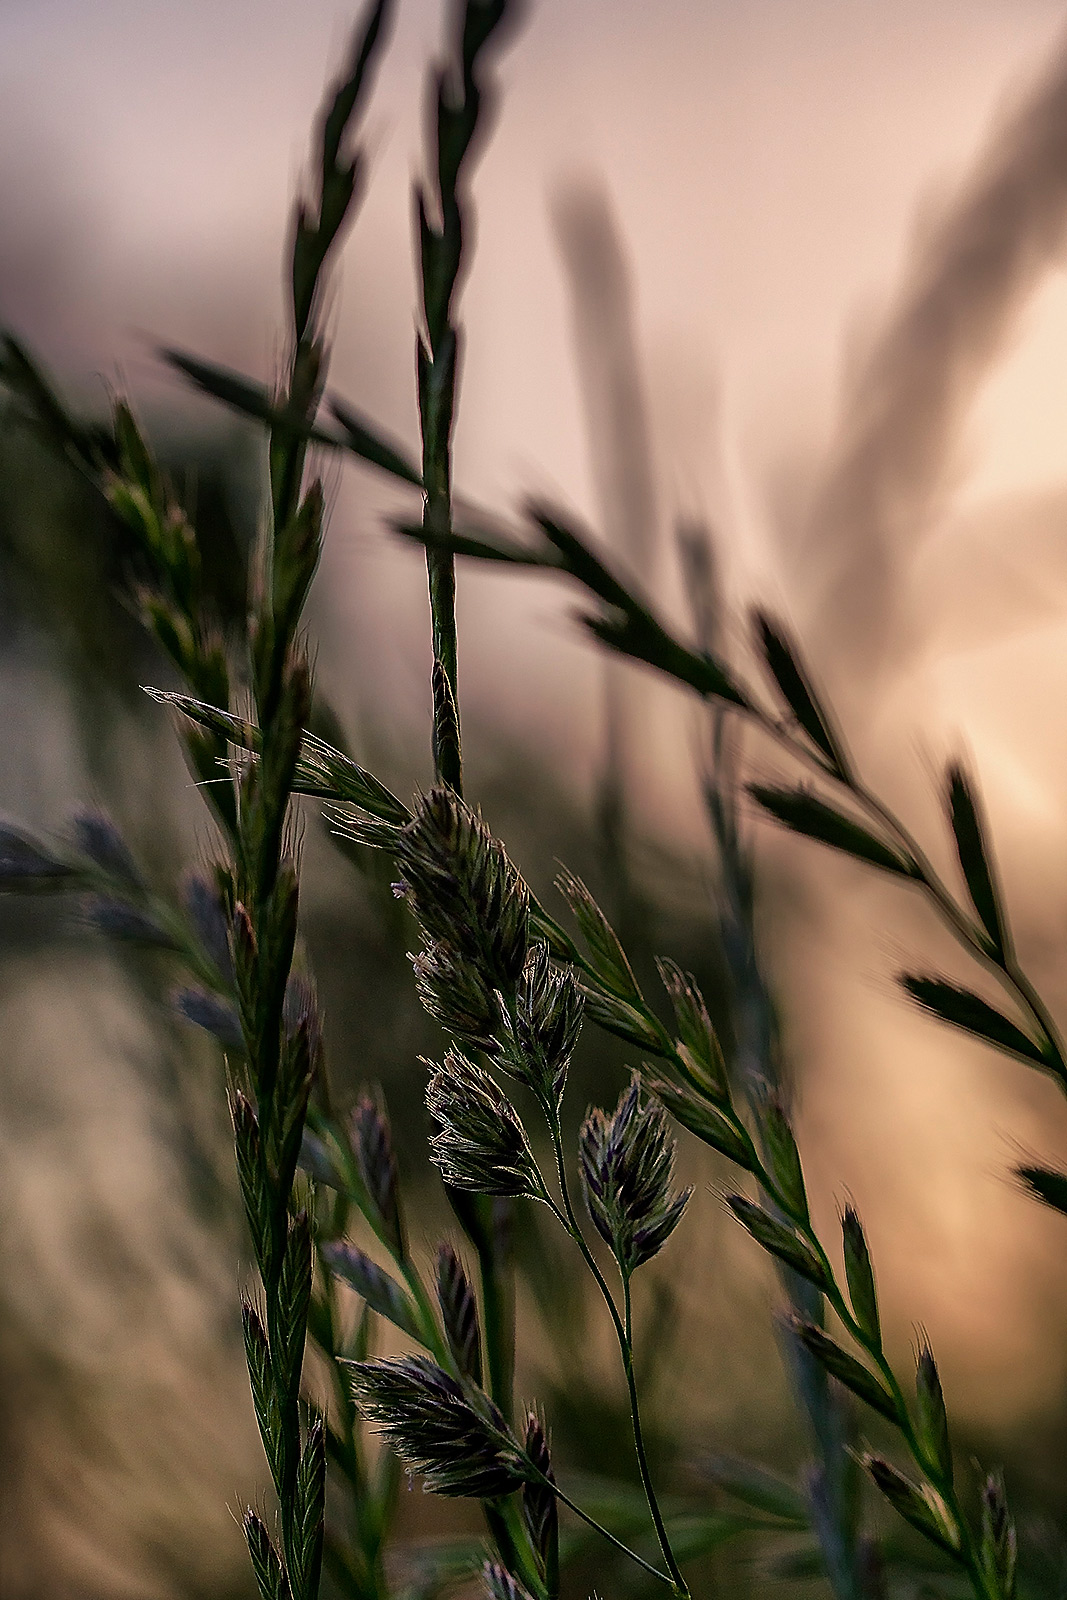 Macro close-up photograph of meadow grass in evening light, featuring Elymus repens (couch grass) and Dactylis glomerata (orchard grass). Soft, warm light bathes the scene as evening sets in, creating a beautifully composed photograph.